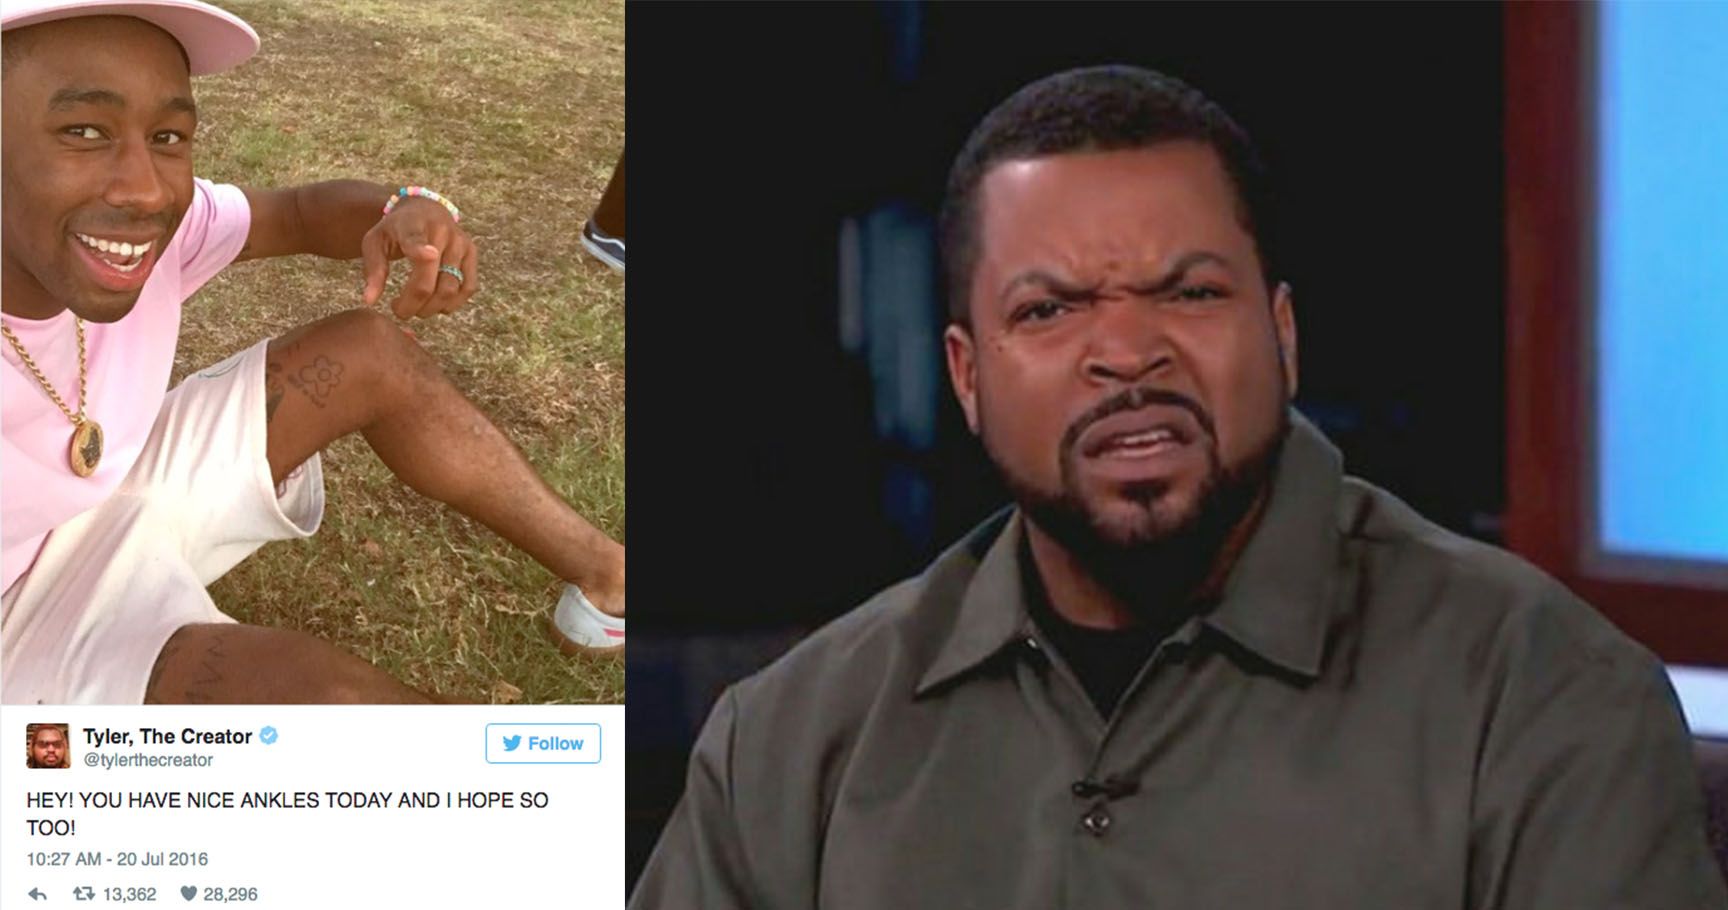 16 Hilarious Tyler The Creator Tweets That Will Make You Say, What?